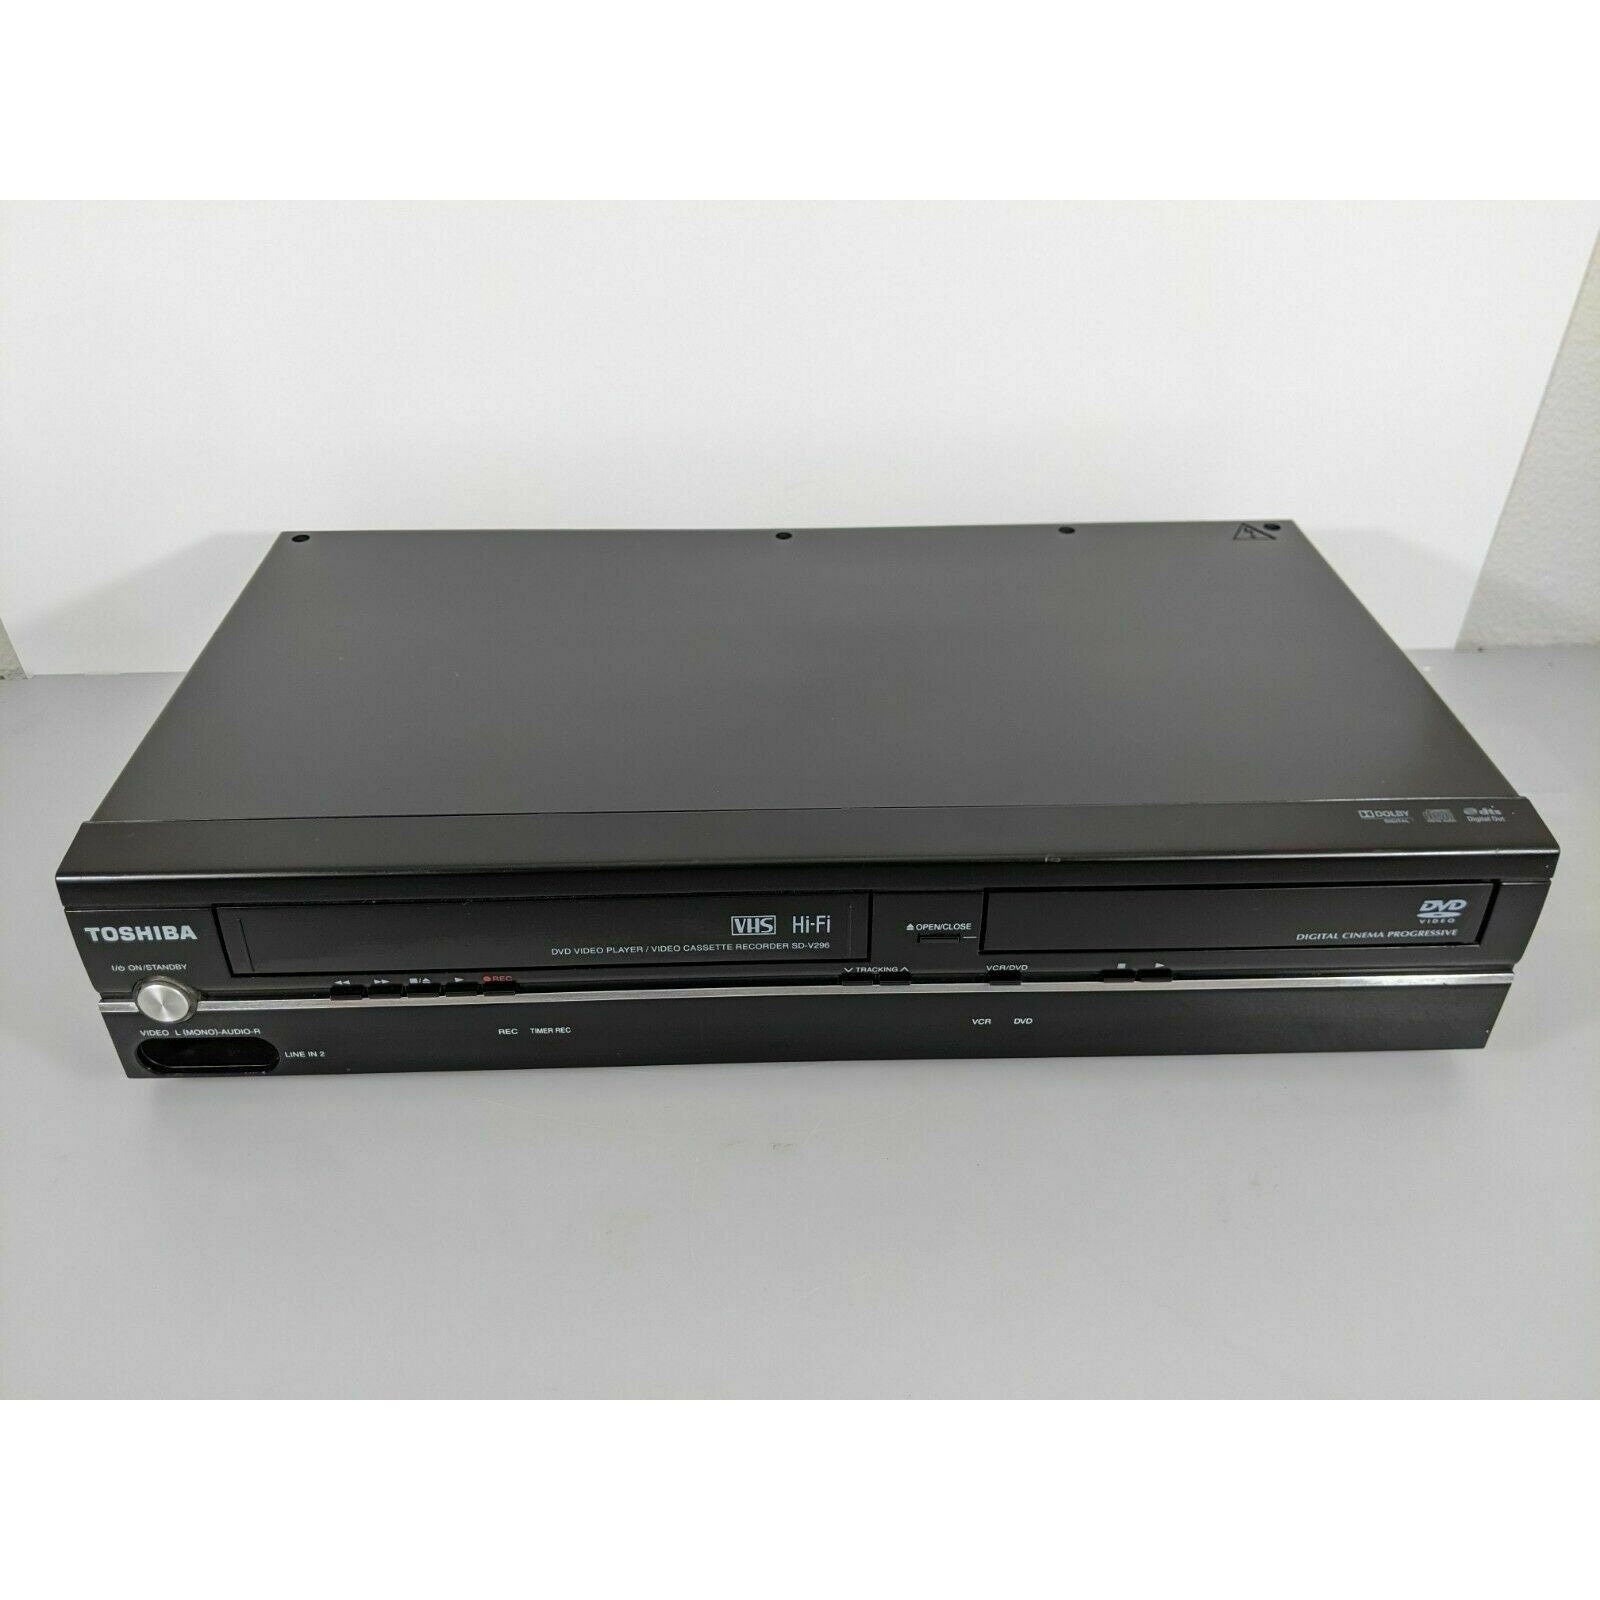 Toshiba SD-V296 DVD/VCR Combination Player - Black Tested & Working No Remote